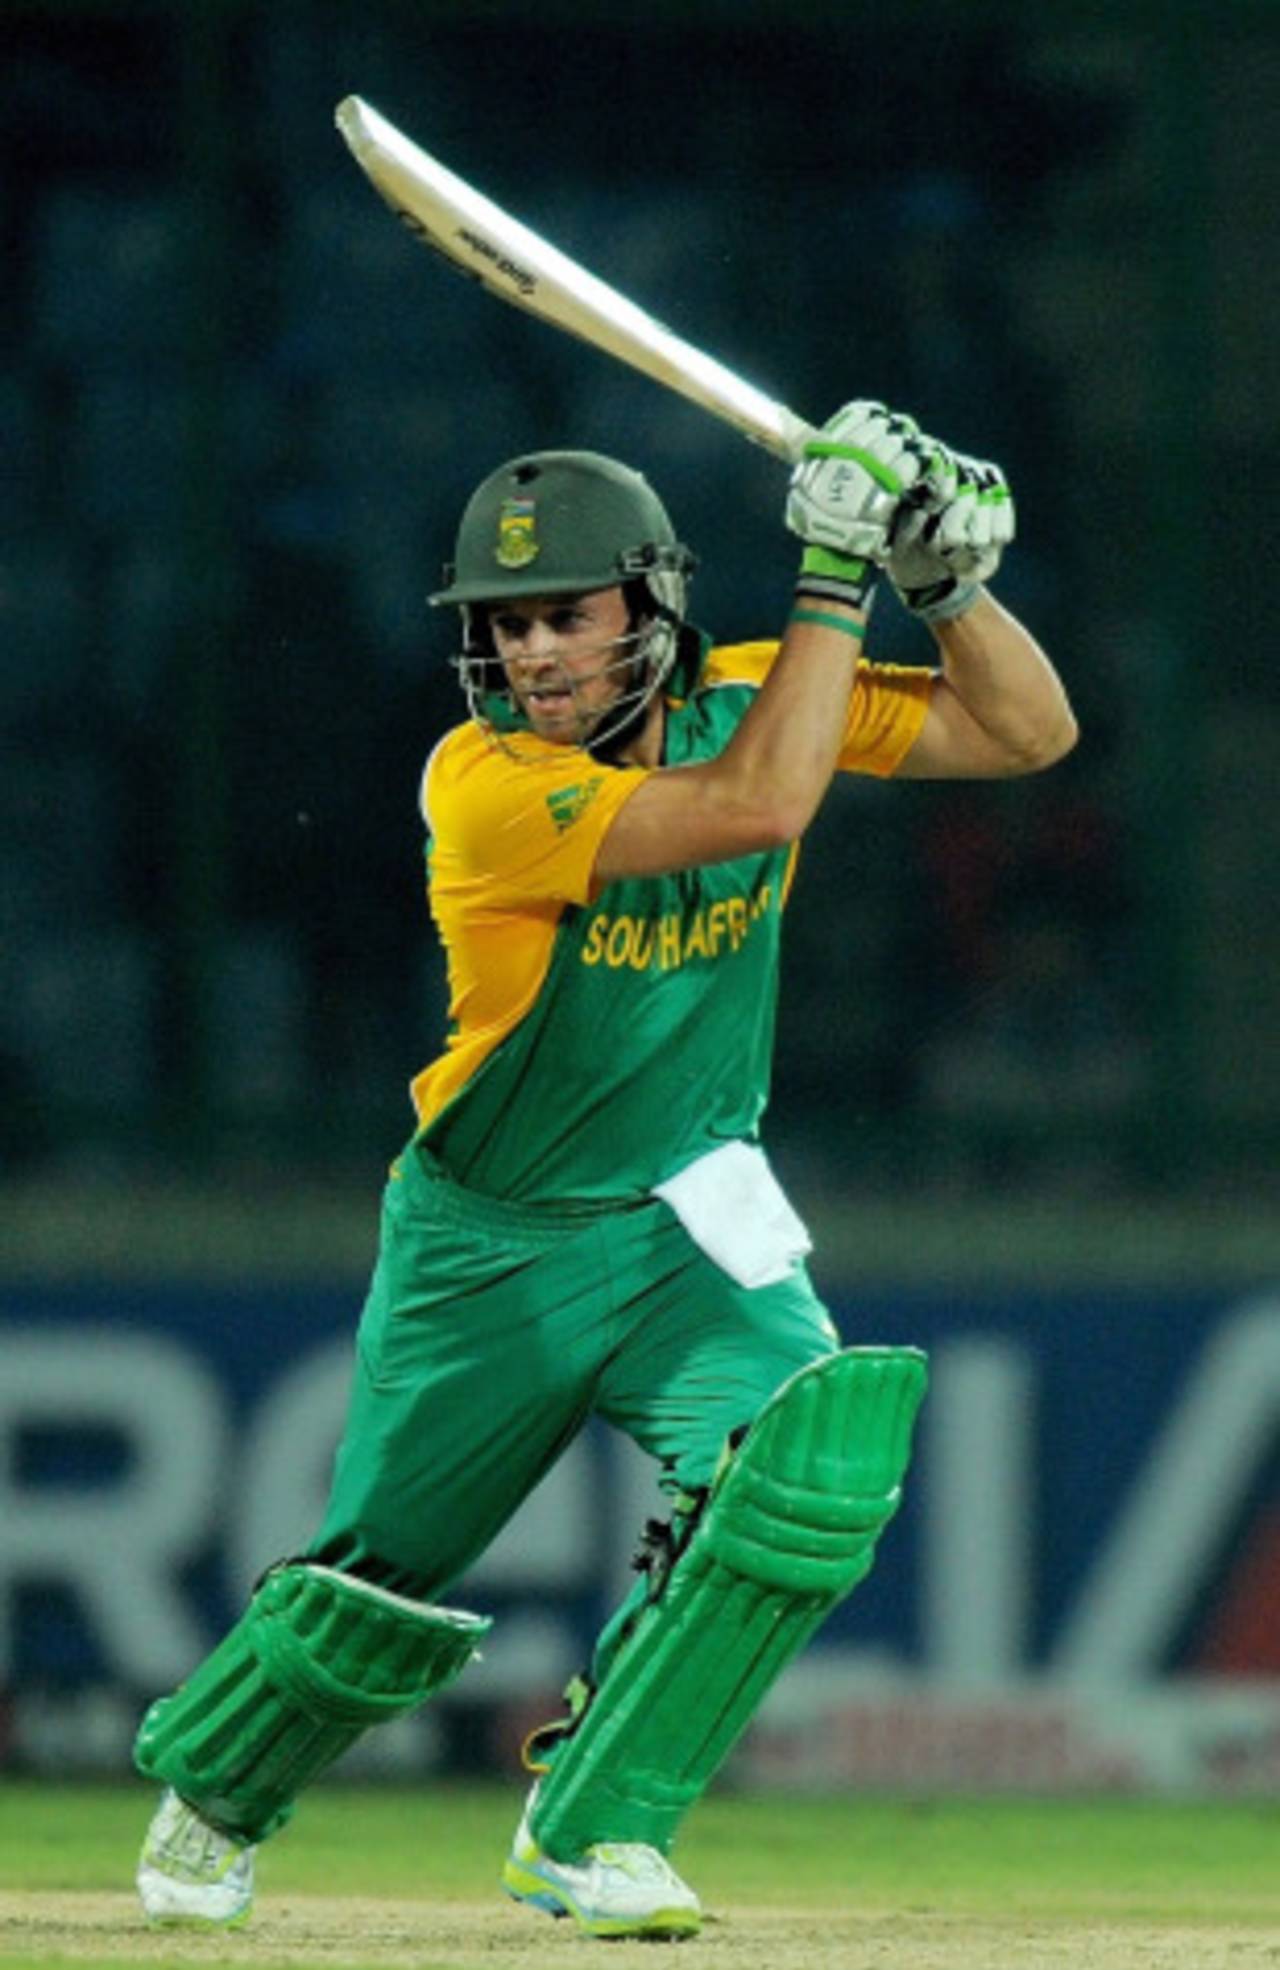 AB de Villiers got to a century off 97 balls, South Africa v West Indies, World Cup, Group B, Delhi, February 24, 2011